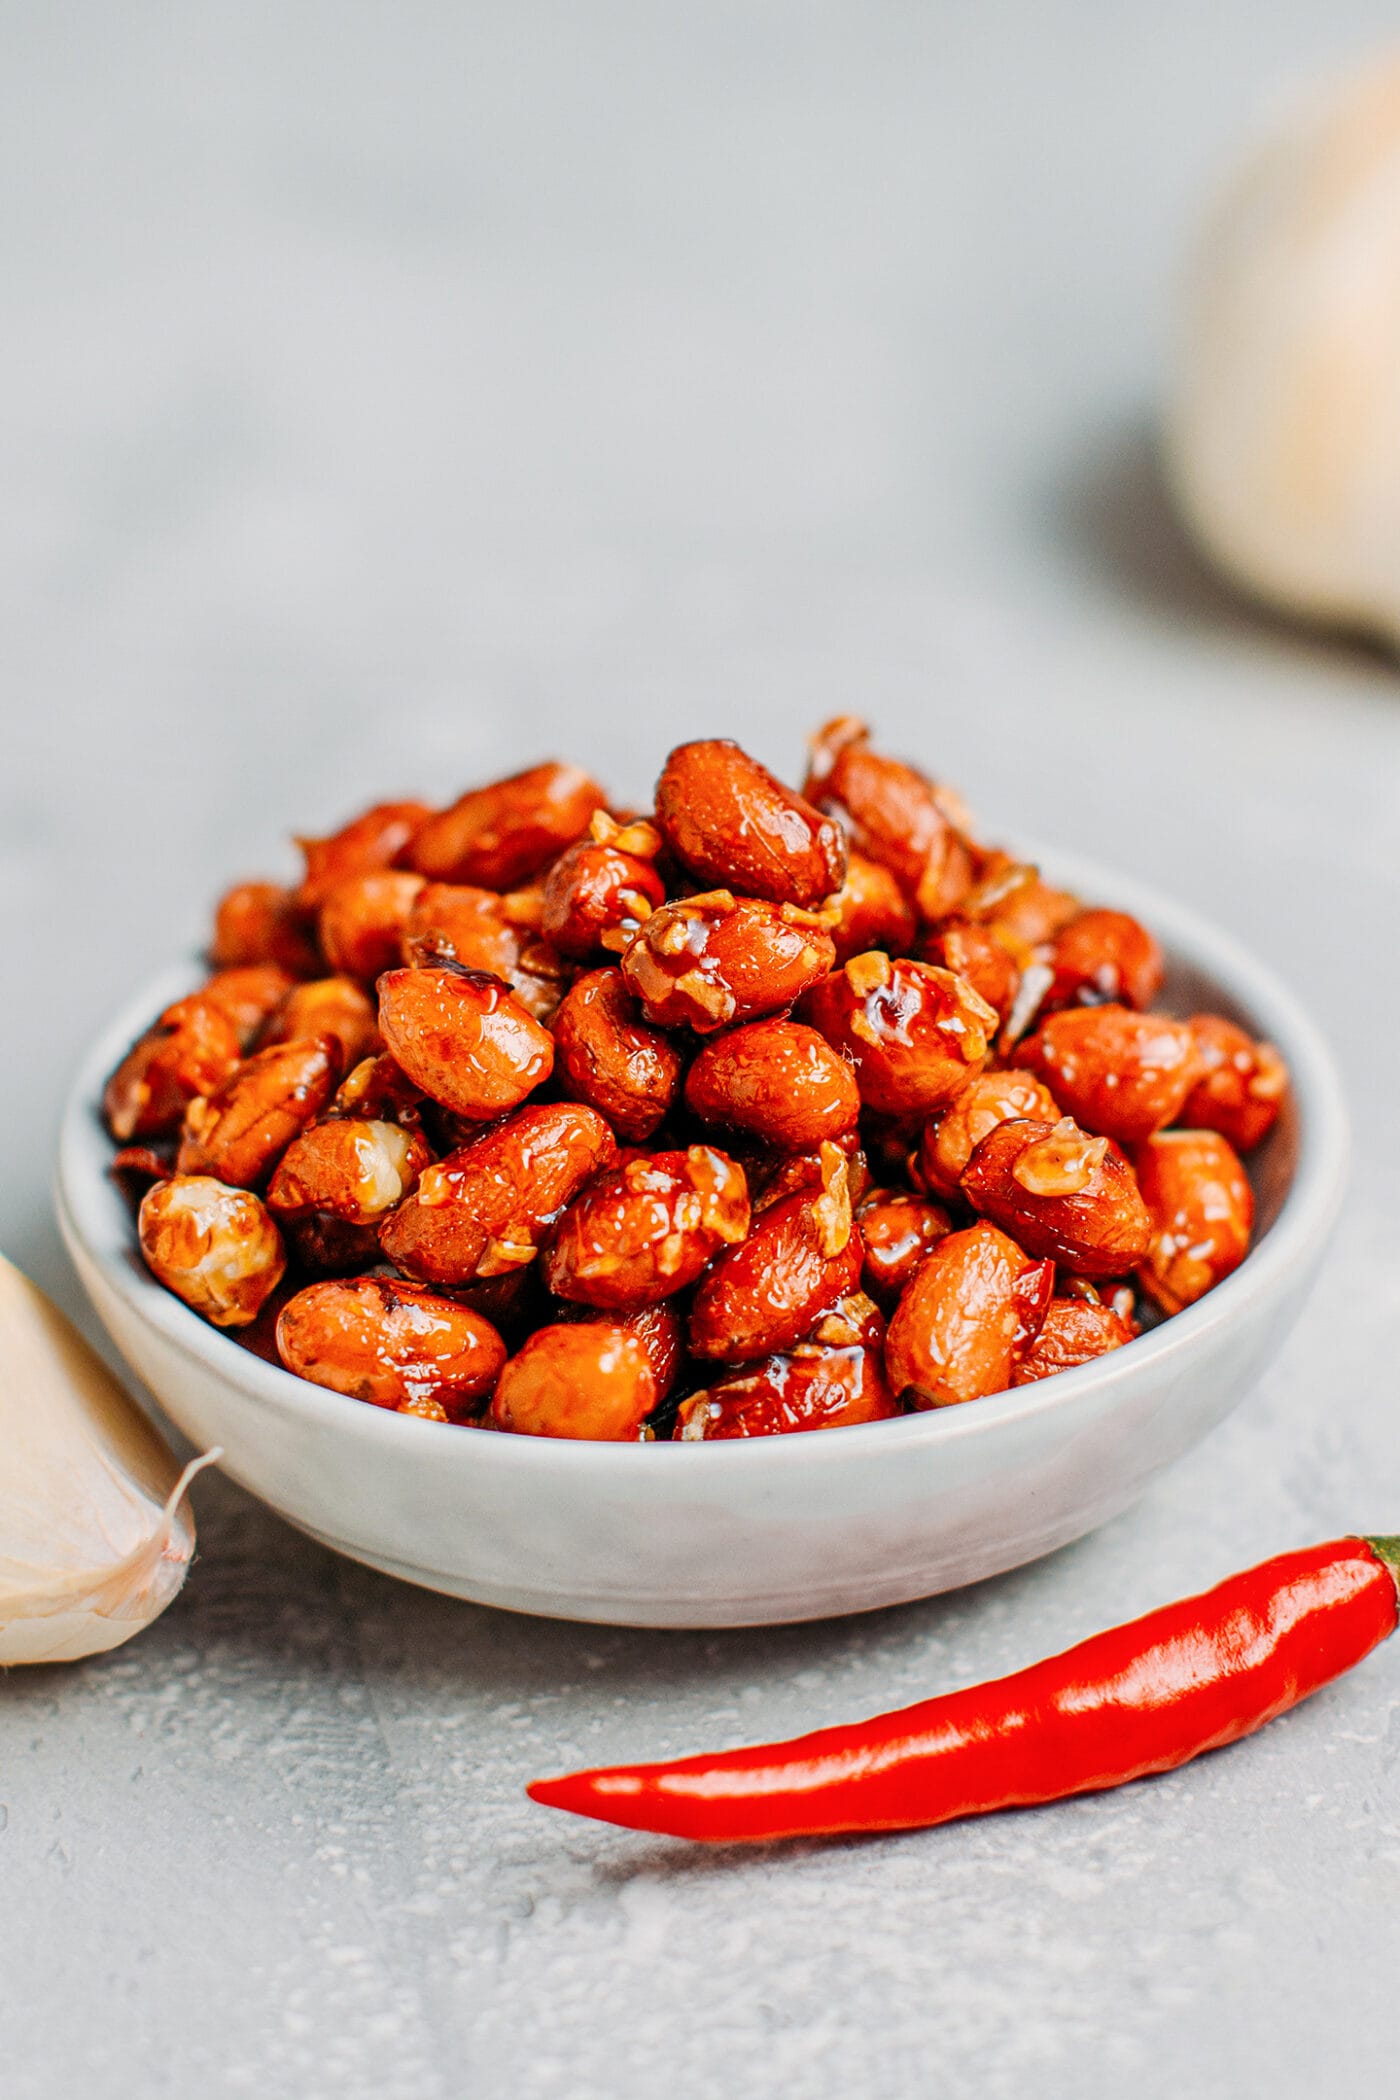 Glazed peanuts with garlic and chili in a bowl.